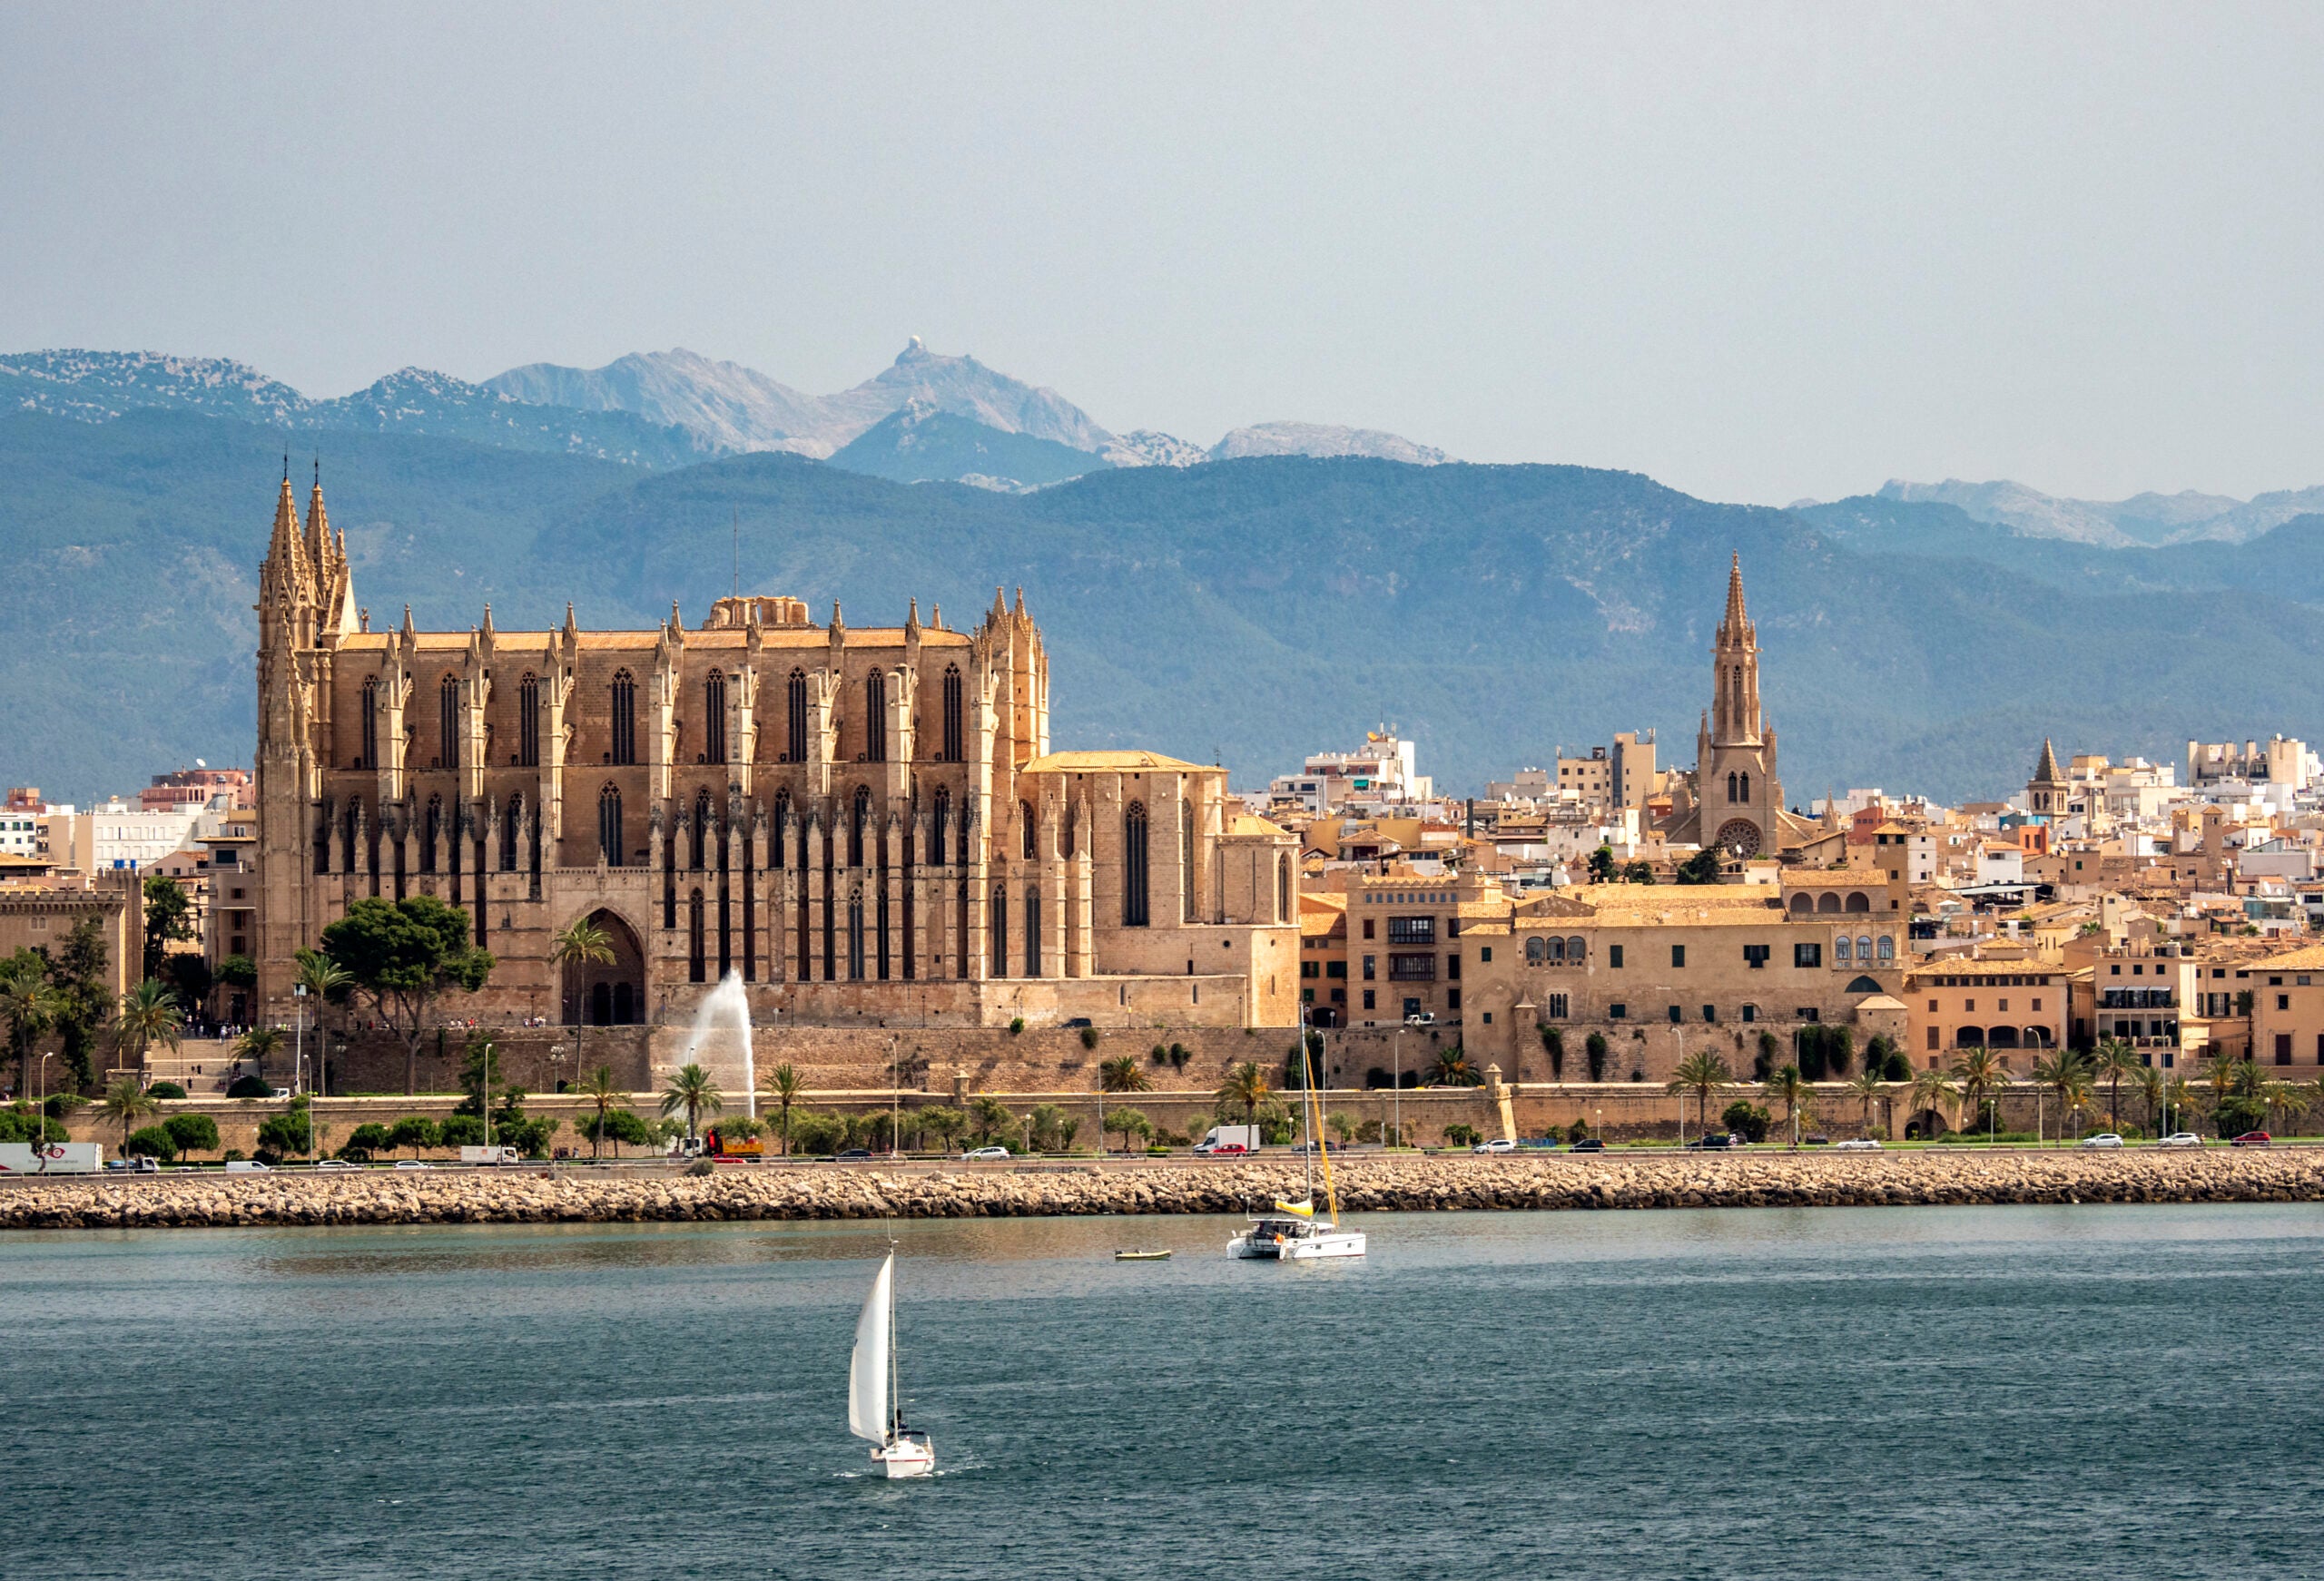 View from the sea of the city and Cathedral of Palma on the island of Majorca.